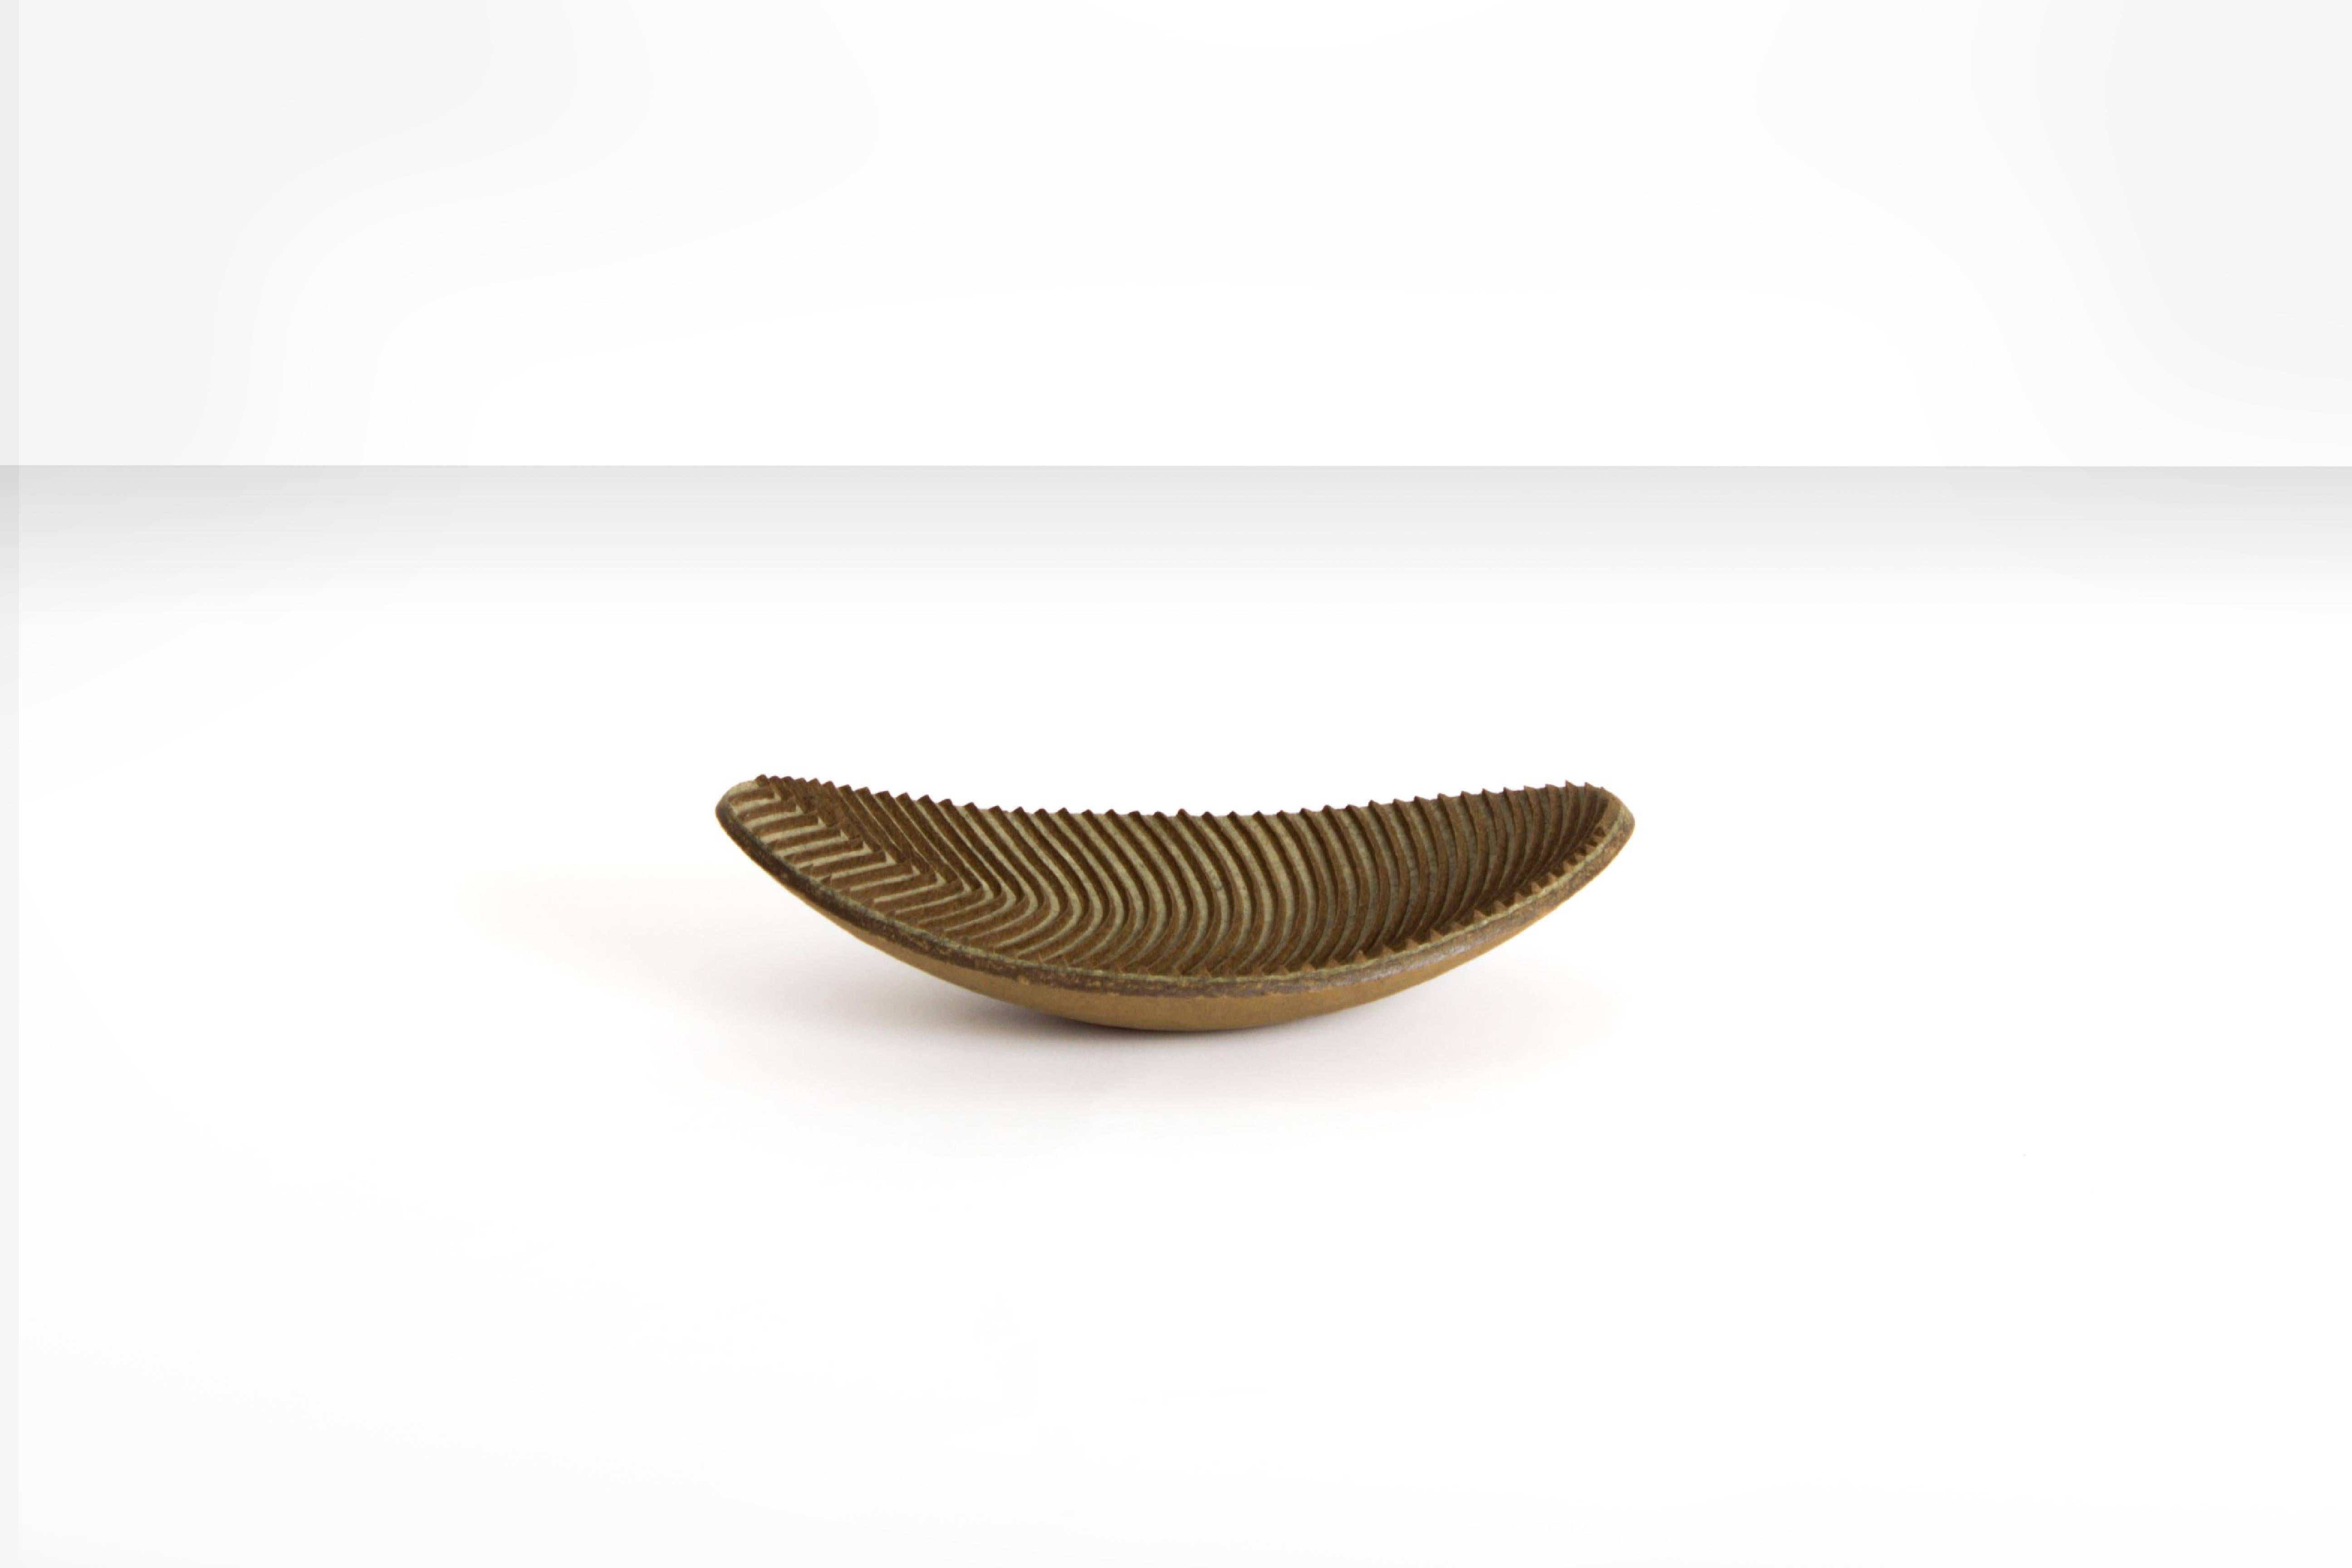 Organic Wabi-Sabi style bowl by contemporary artist Domingos Tótora, made of recycled cardboard.

About the artist:
Domingos Tótora (born and raised in Maria da Fé, Brazil, 1960) creates objects and sculptures where beauty is inseparable from